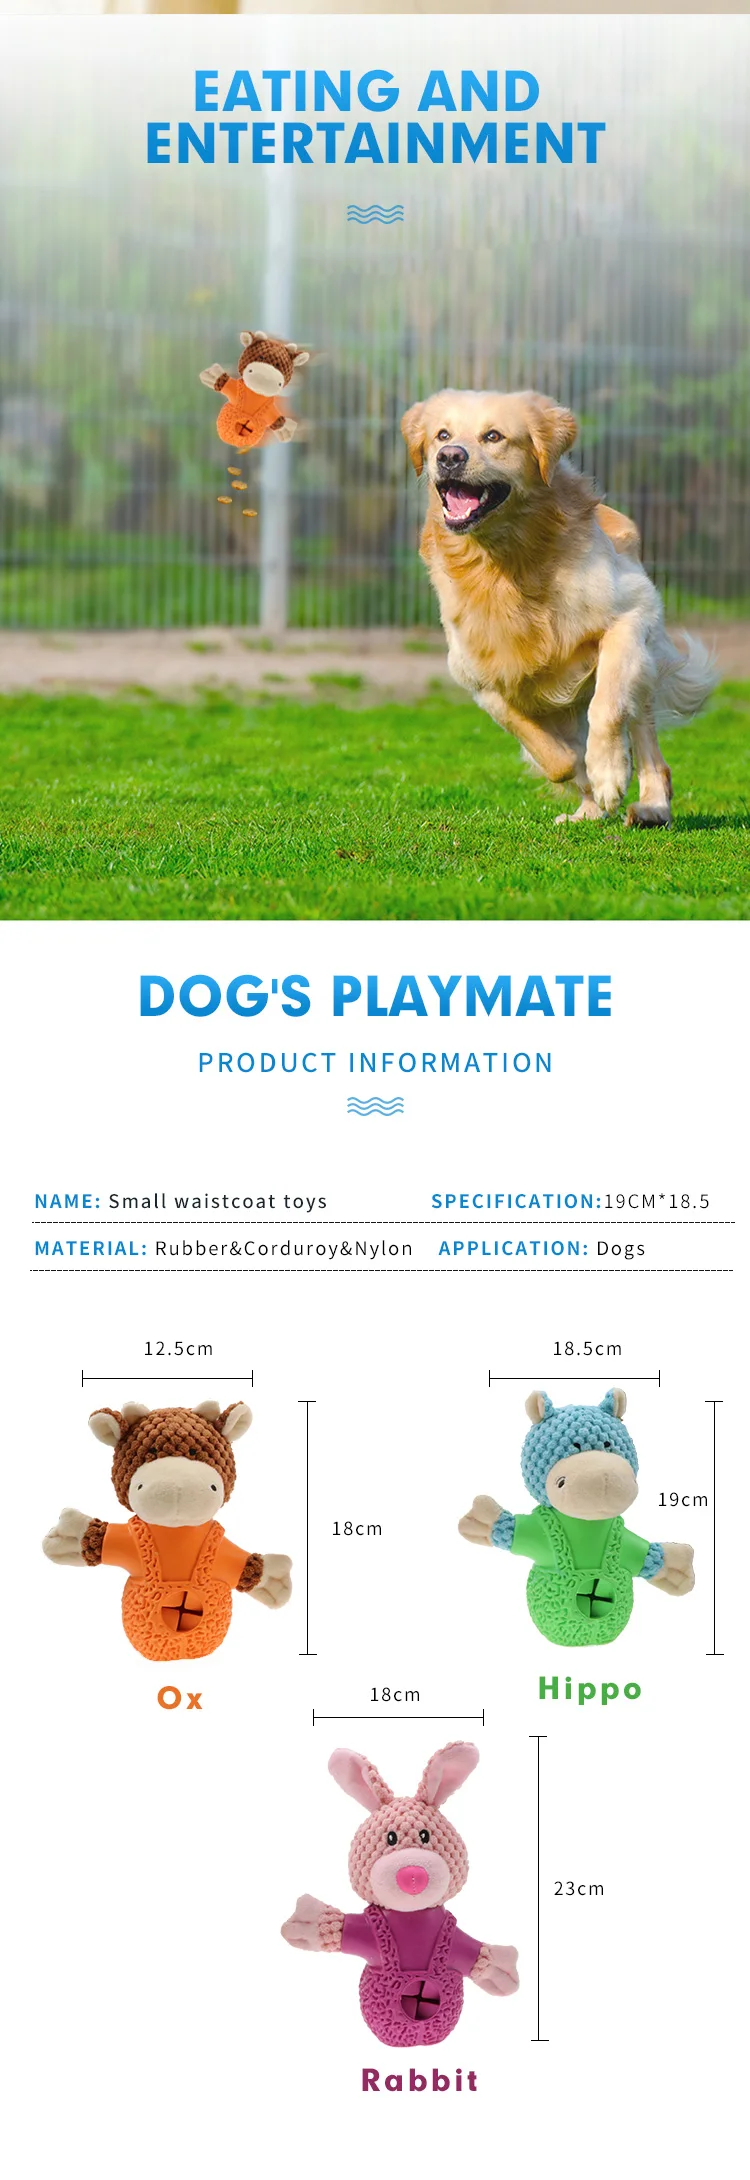 Non-toxic durable corduroy toys Rabbit chews and puppies play Recommendation of Puppy